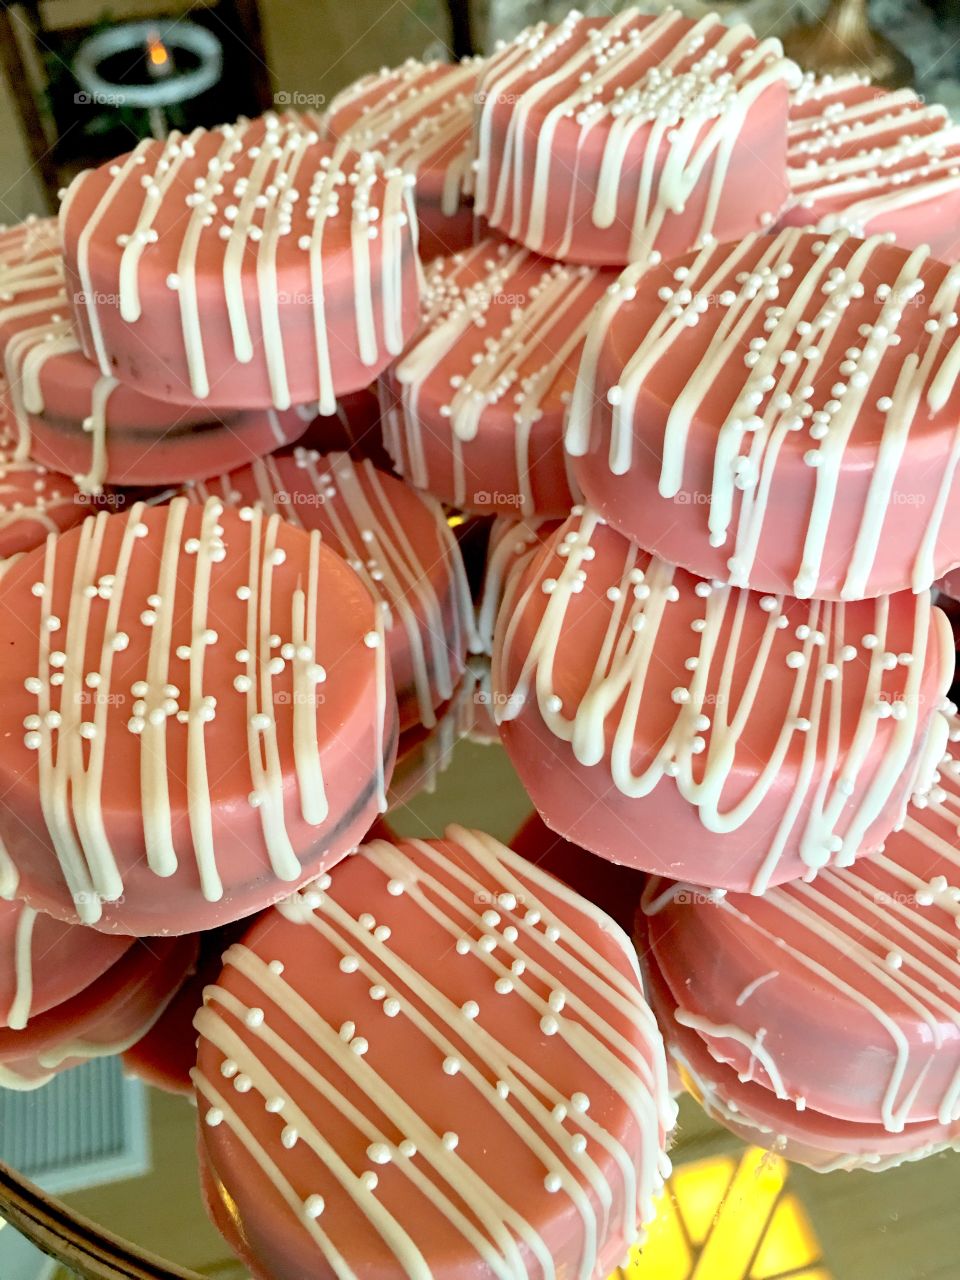 Pink chocolate covered cookies decorated with white chocolate drizzle and sprinkles